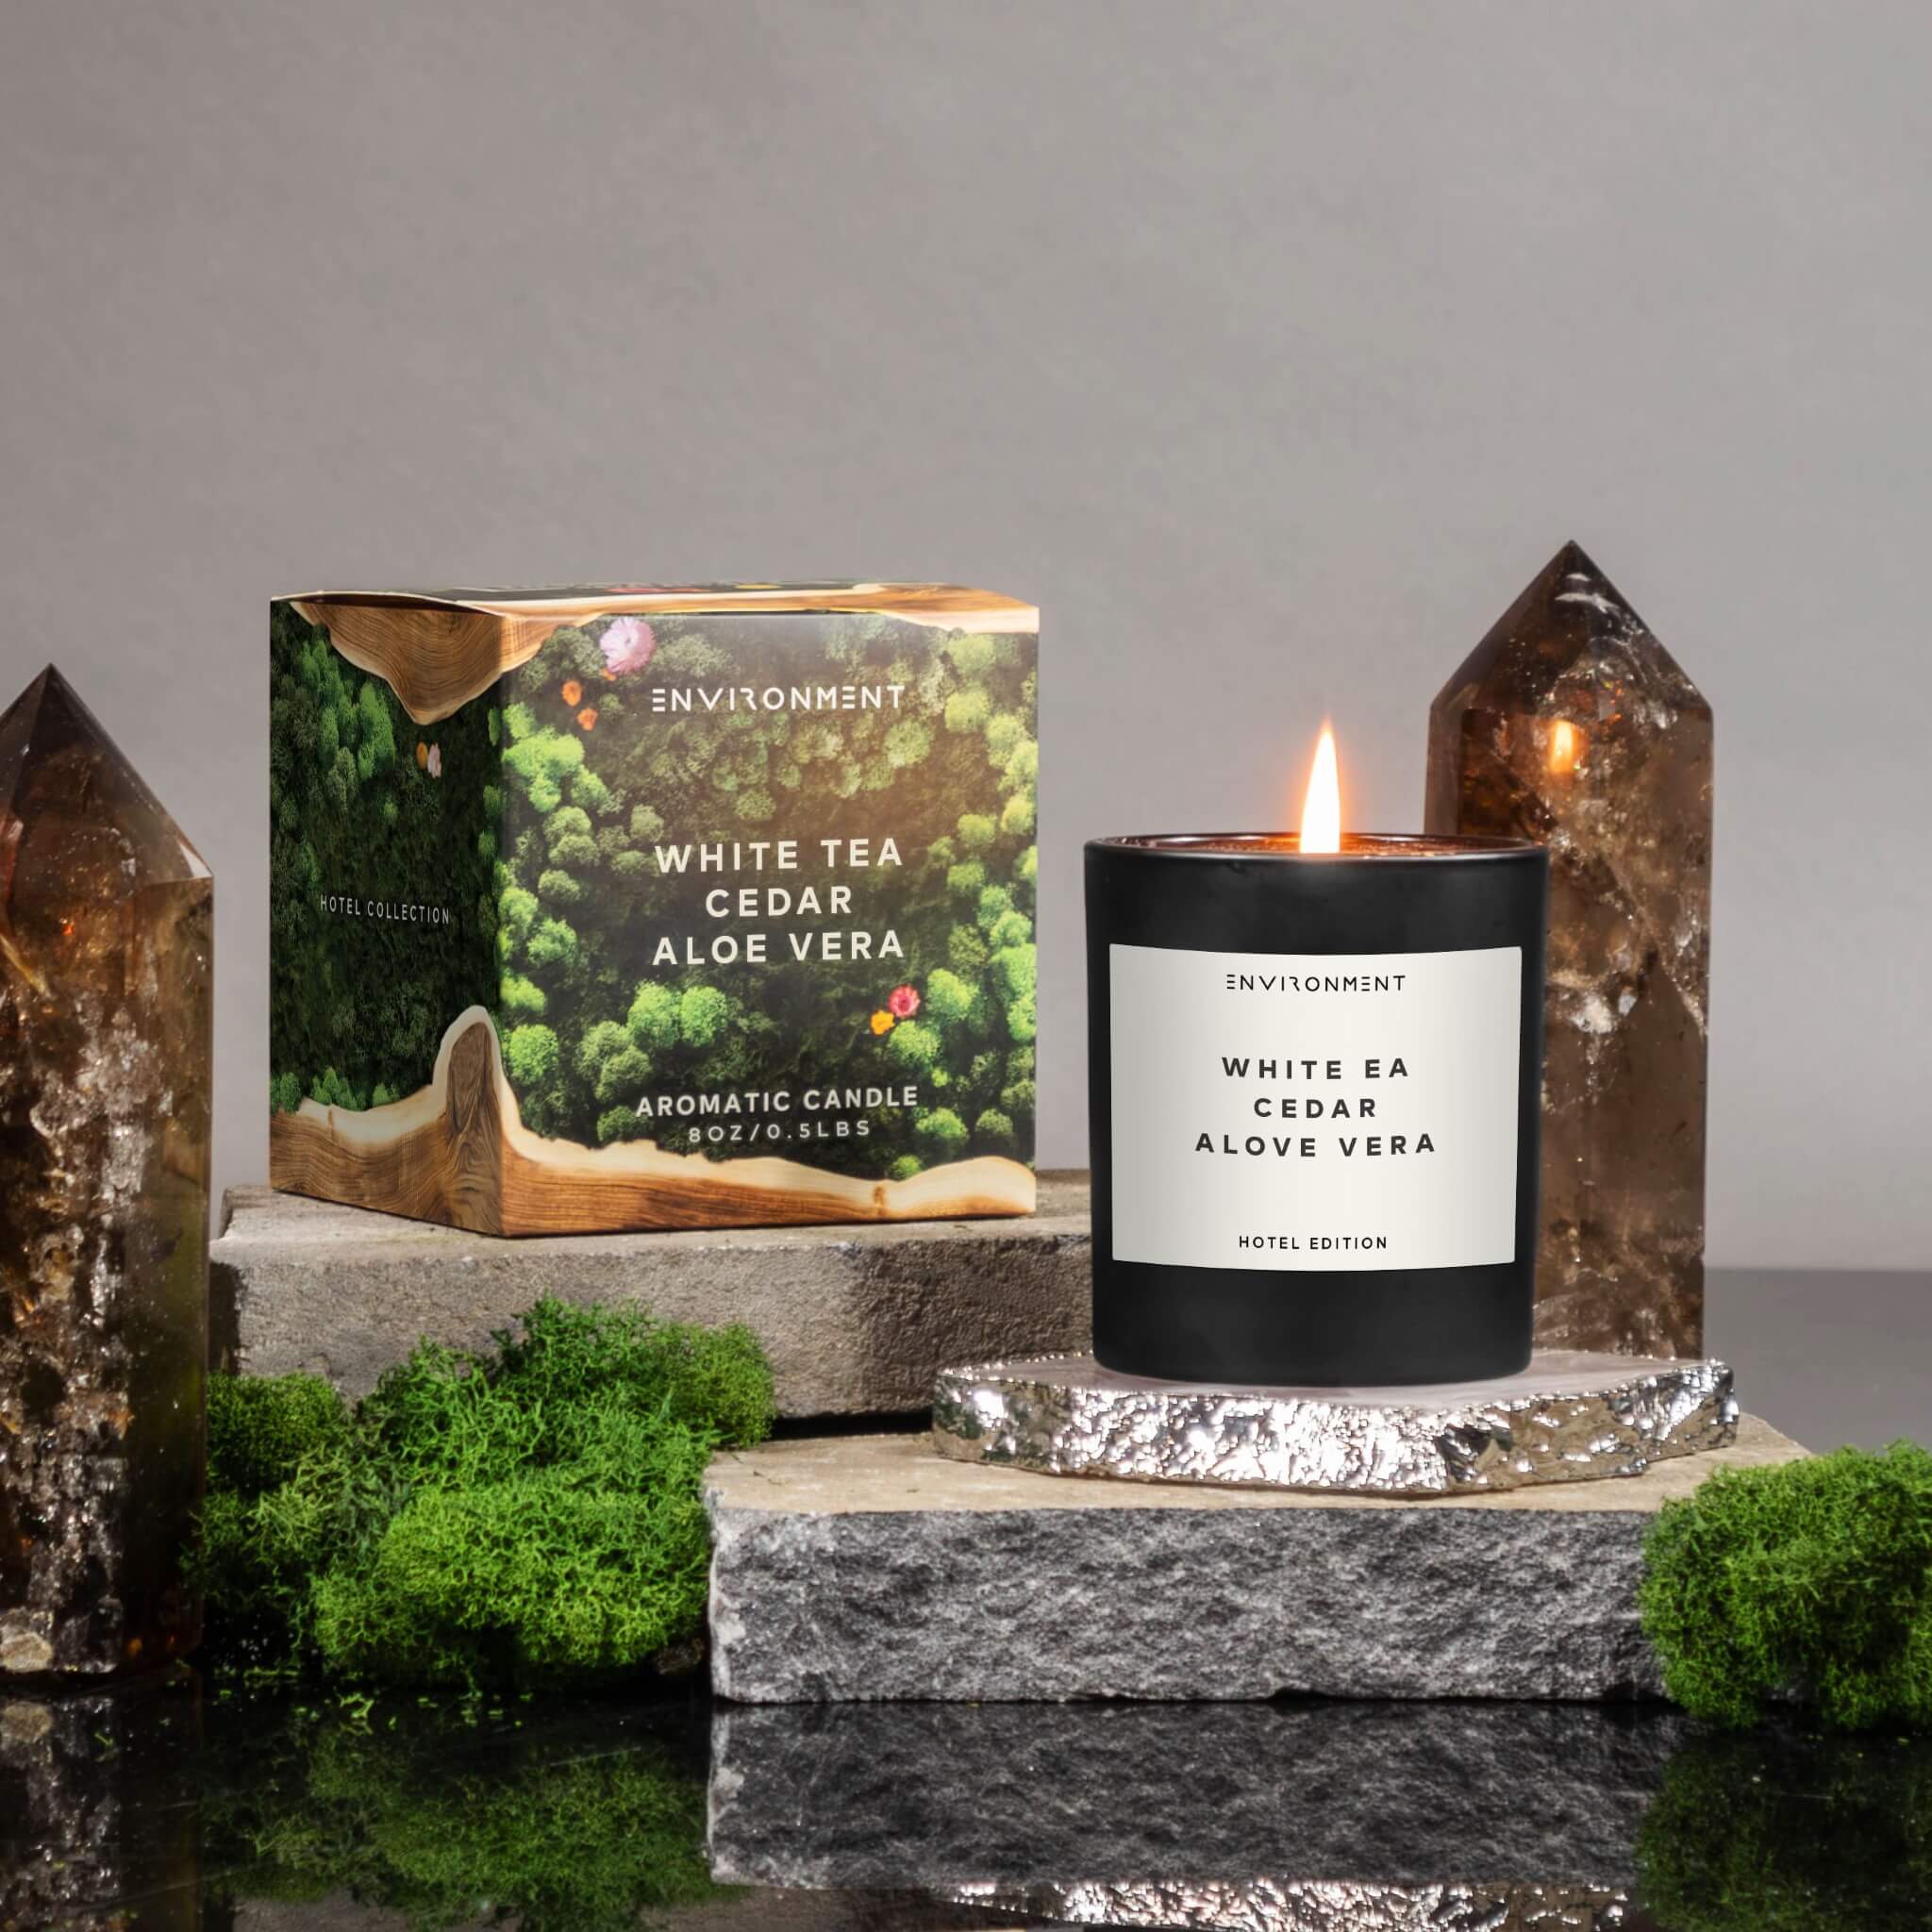 8oz White Tea | Cedar | Aloe Vera Candle with Lid and Box (Inspired by Westin Hotel®)